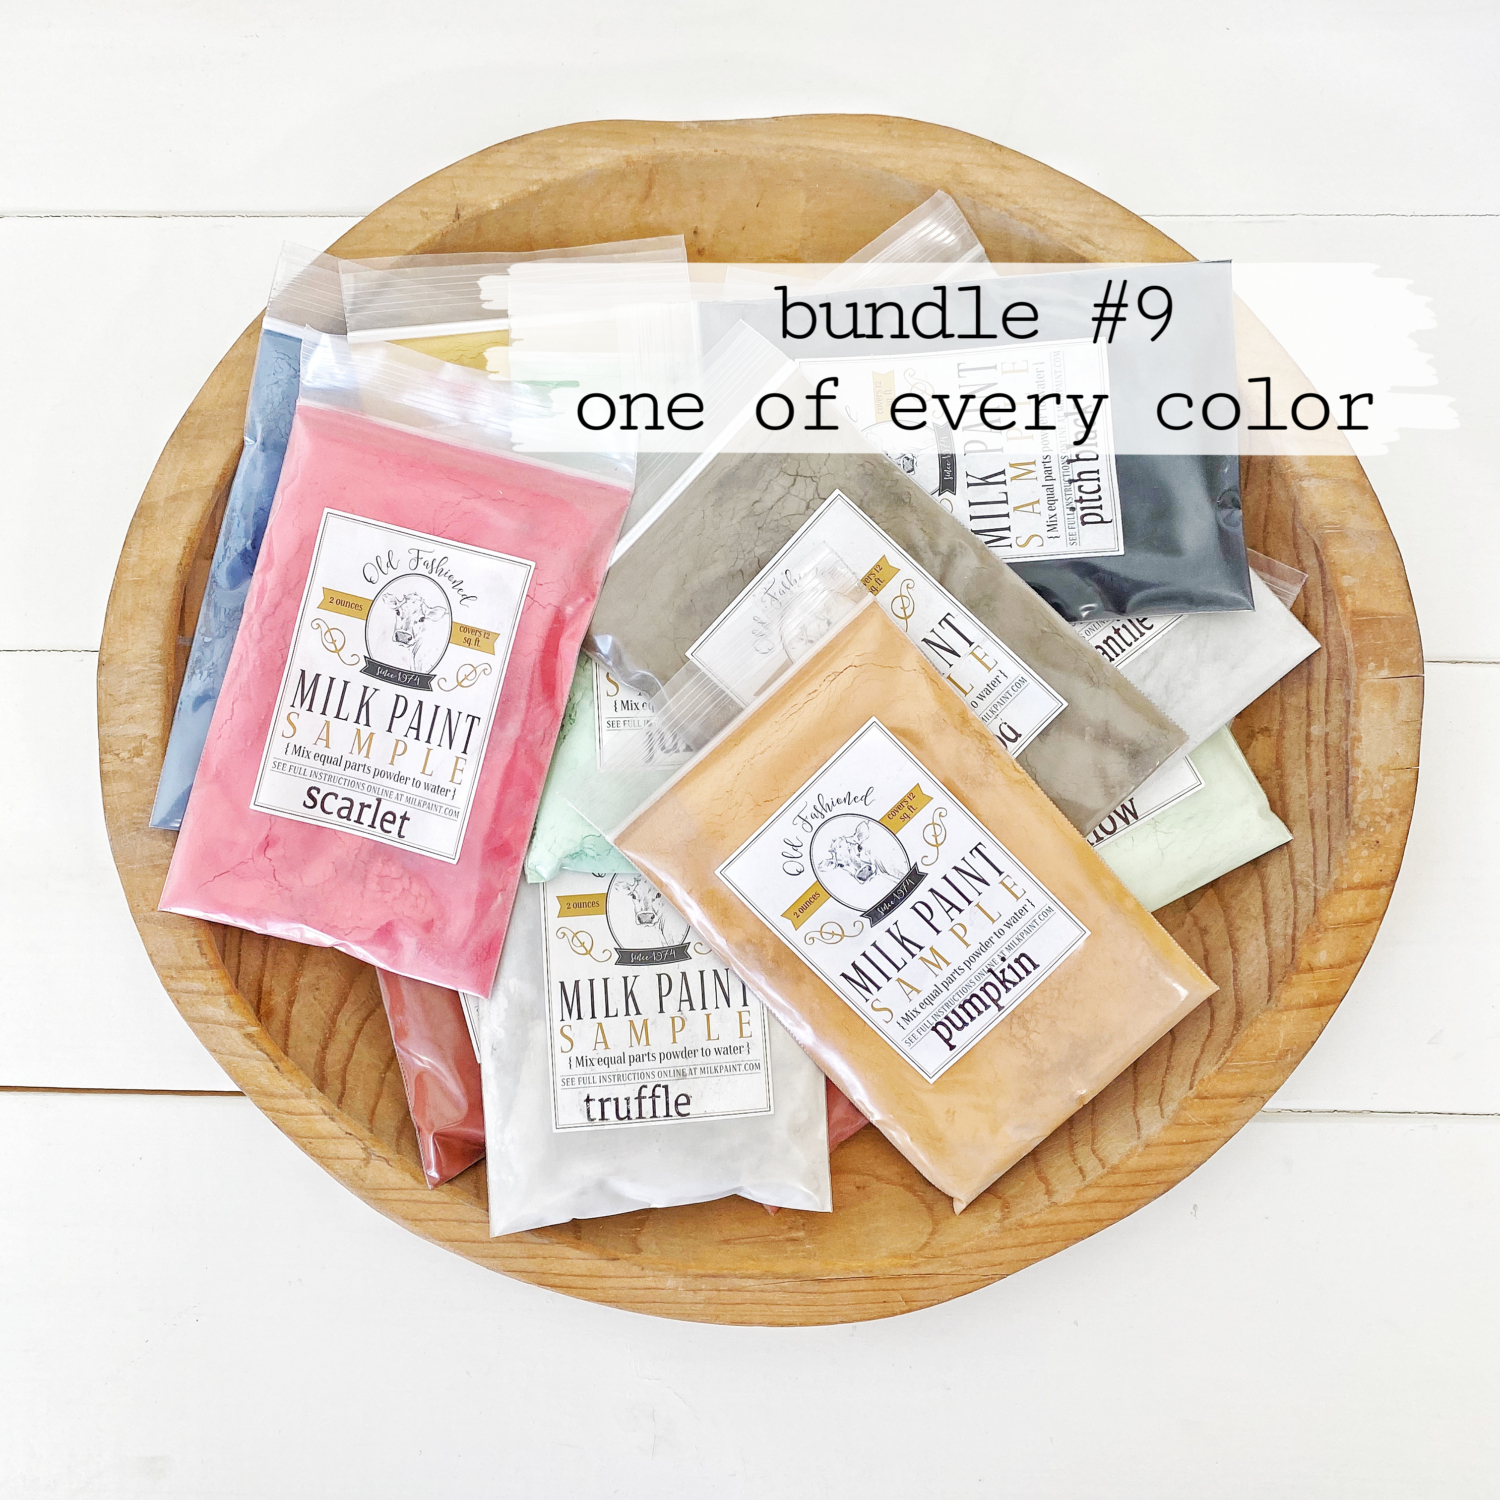 old fashioned milk paint bundle #9 – one of every color – milkpaint